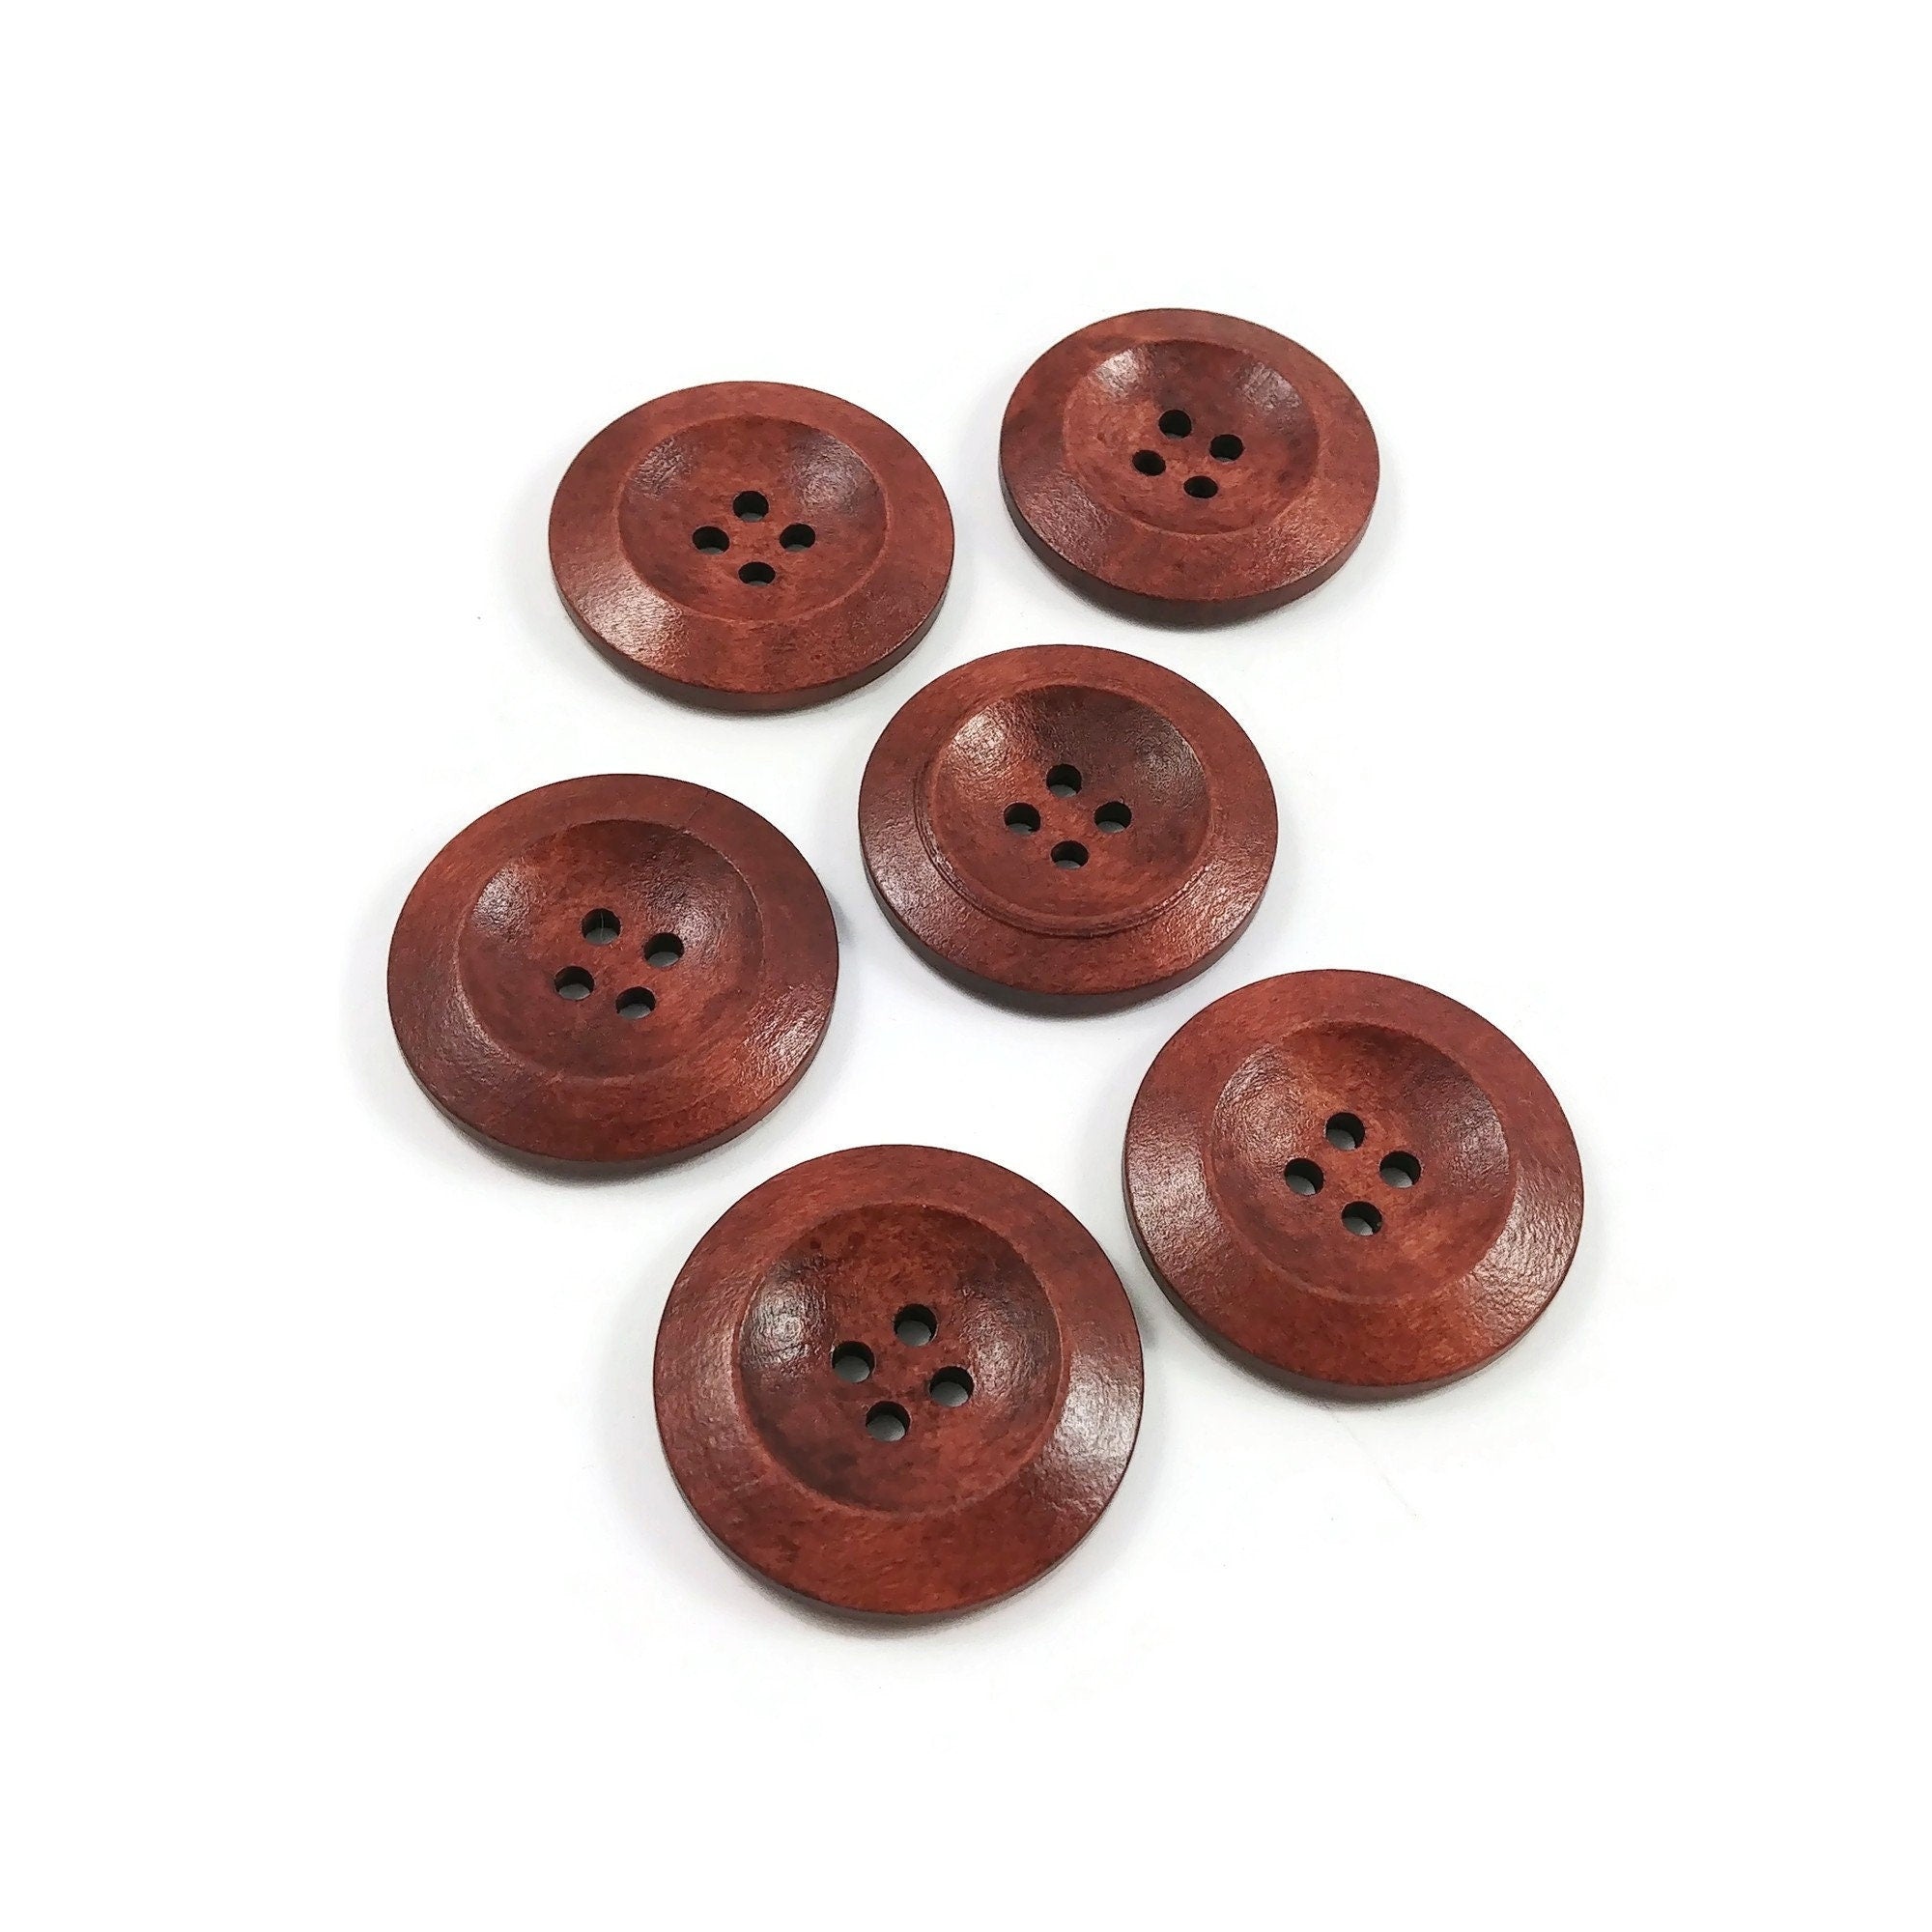 30mm wooden buttons, Red brown sewing buttons, 6 craft knitting buttons